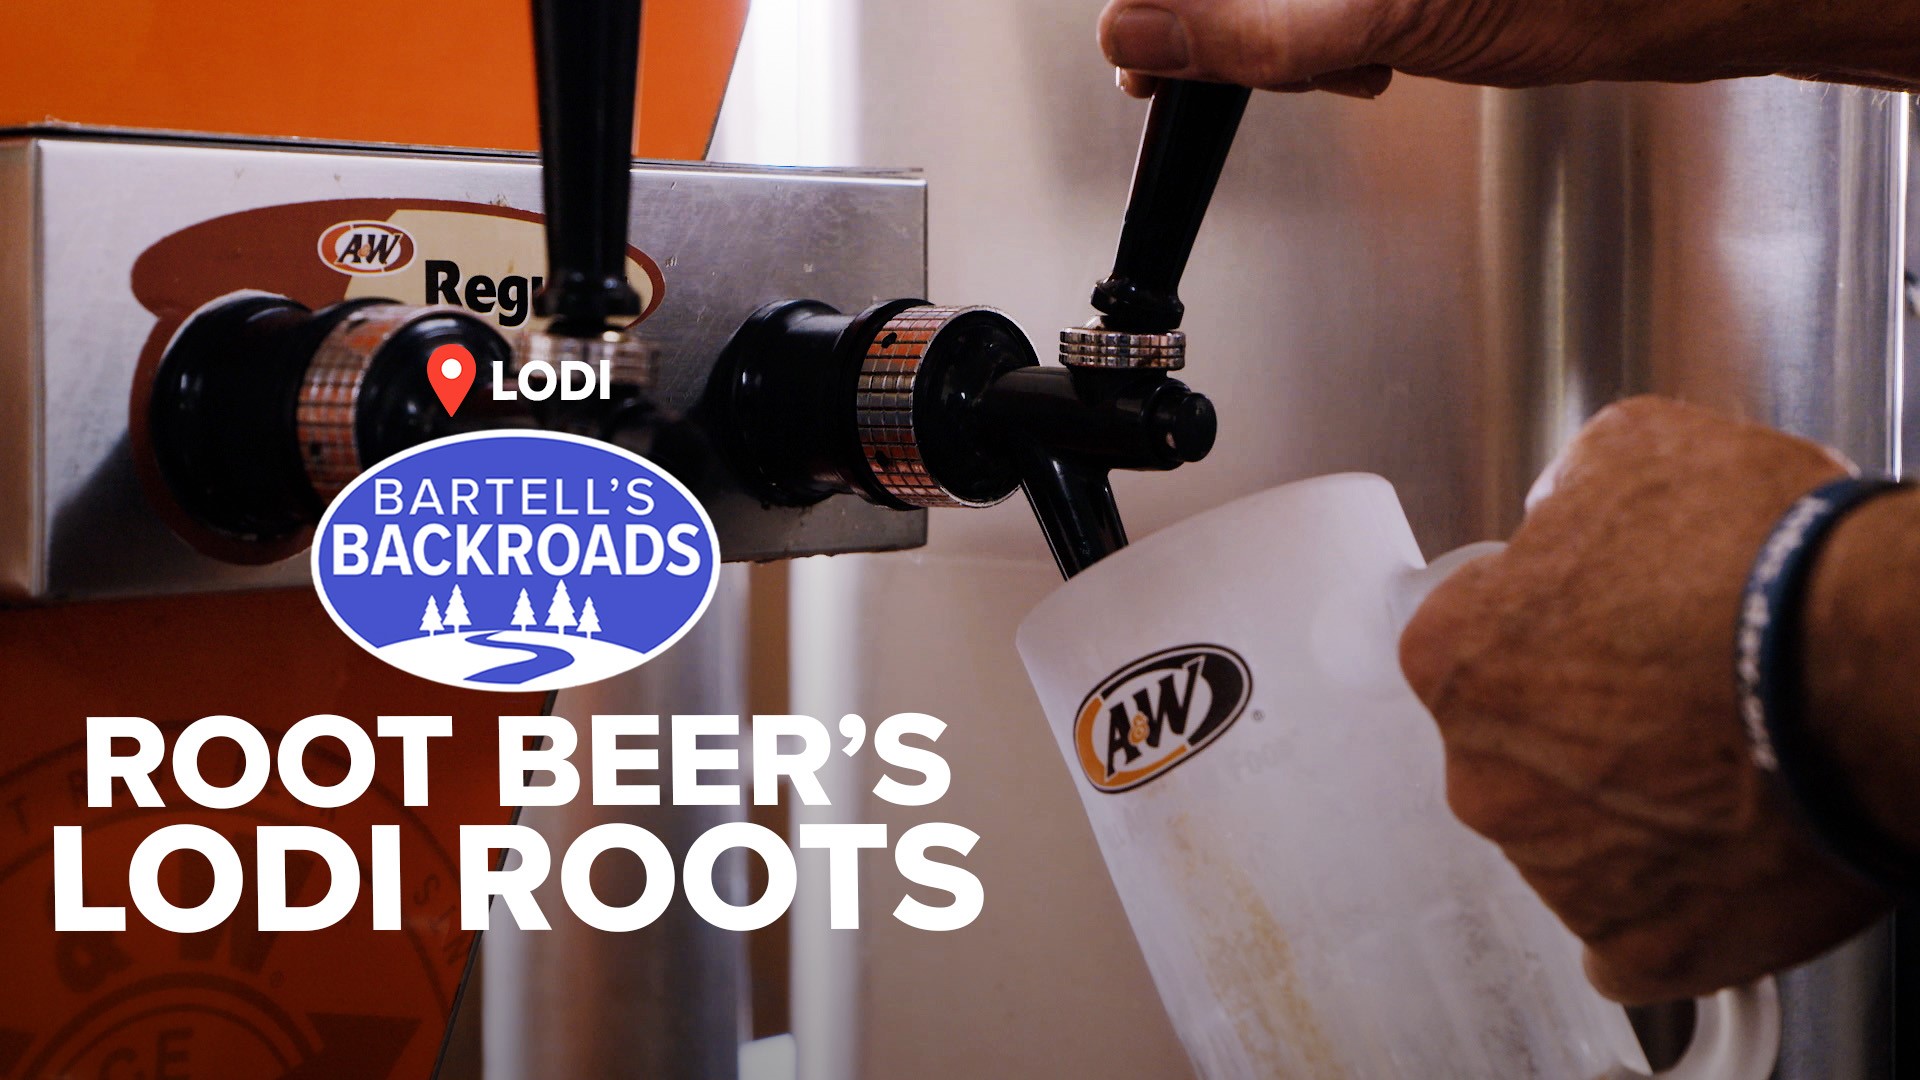 Celebrate with a free float in Lodi, home of the original A&W root beer shop.